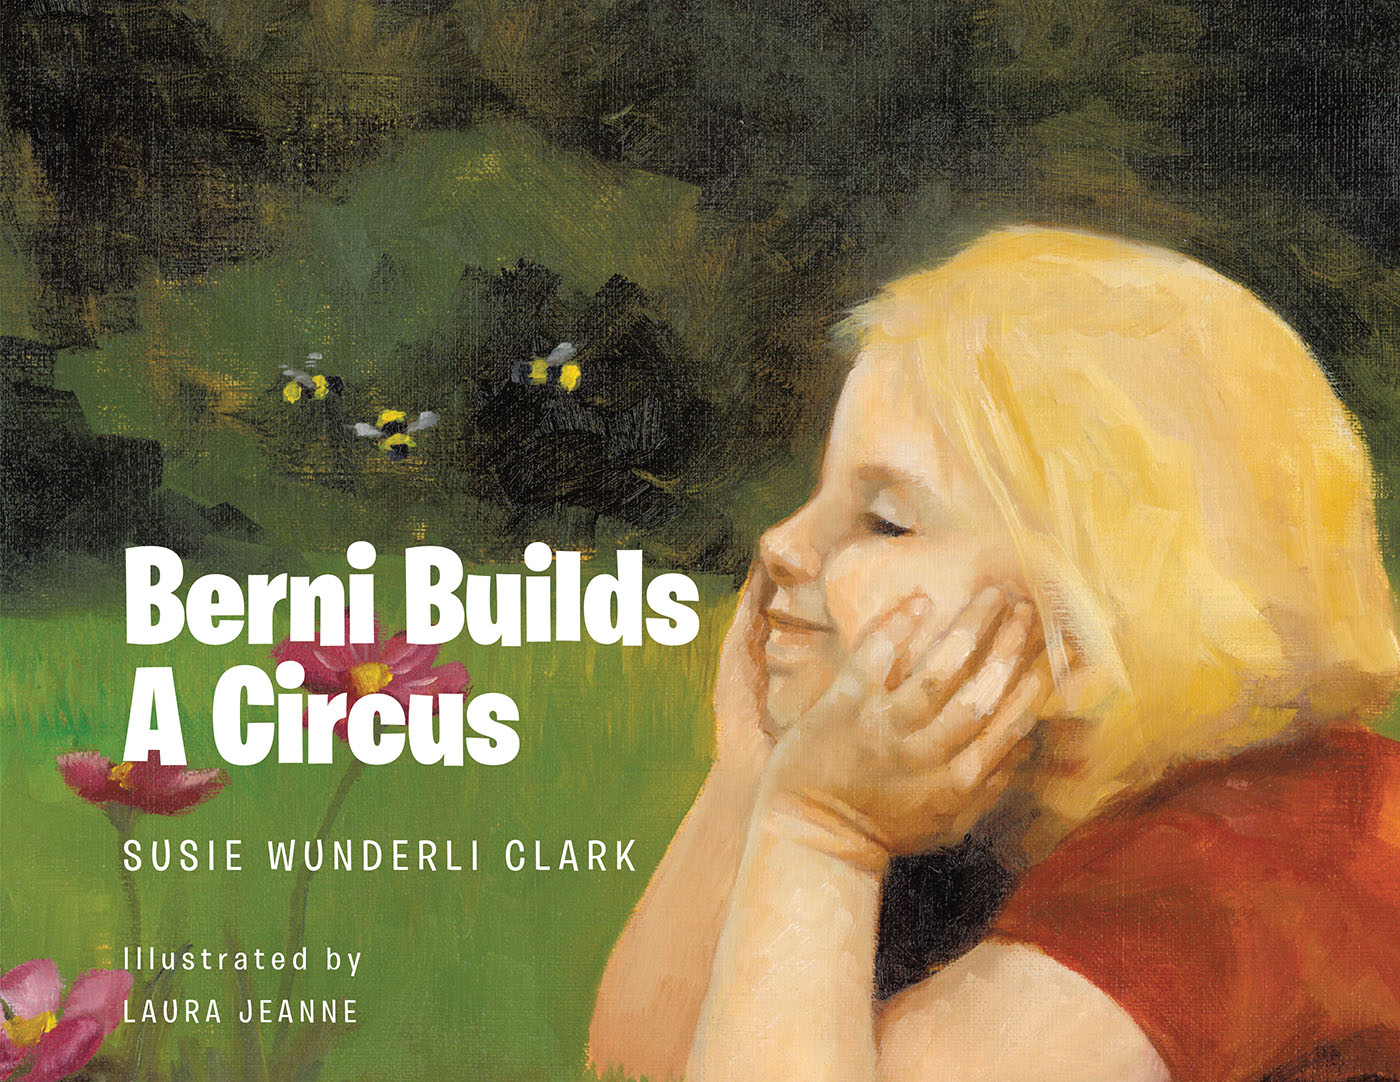 Susie Wunderli Clark’s New Book, "Berni Builds a Circus," Tells the Marvelous Story of an Imaginative Young Girl Who Puts Together a Circus Right in Her Own Backyard